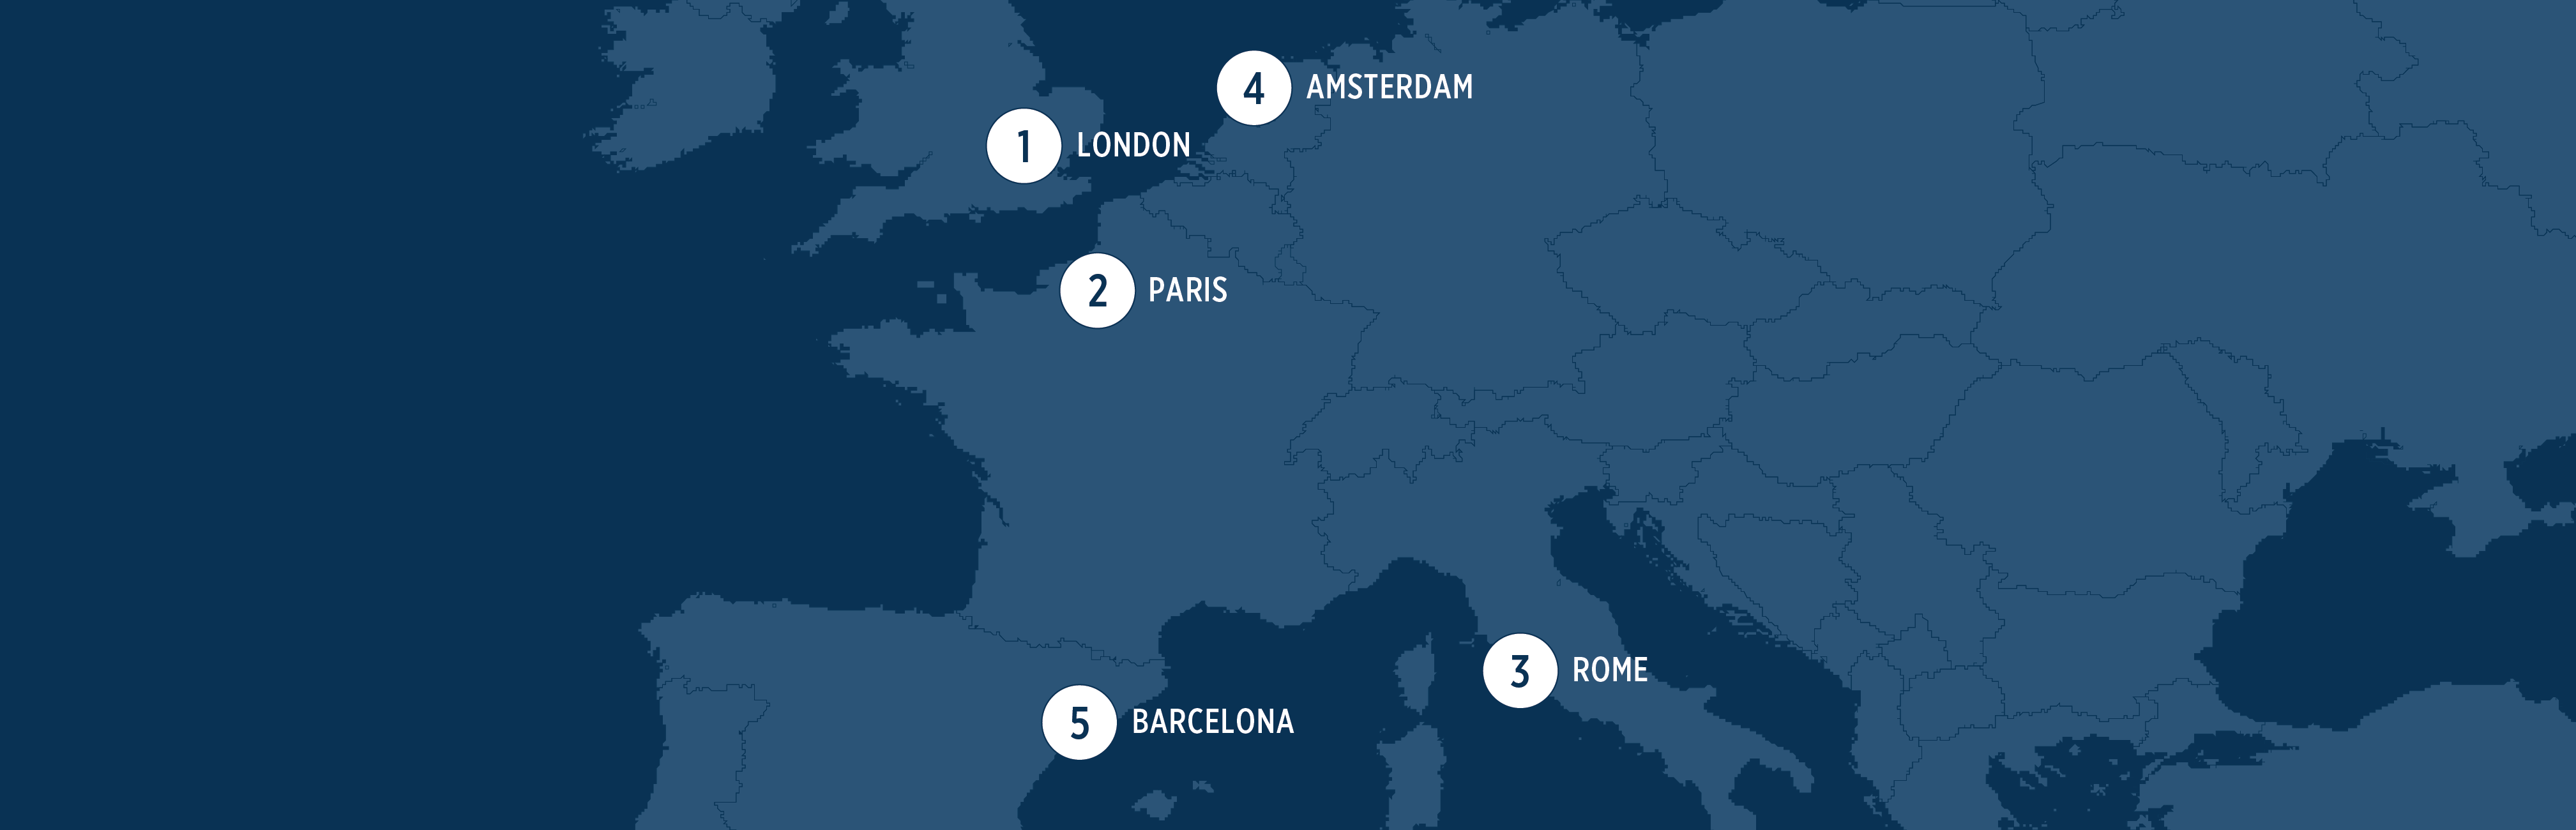 Map showing the top five destinations in Europe